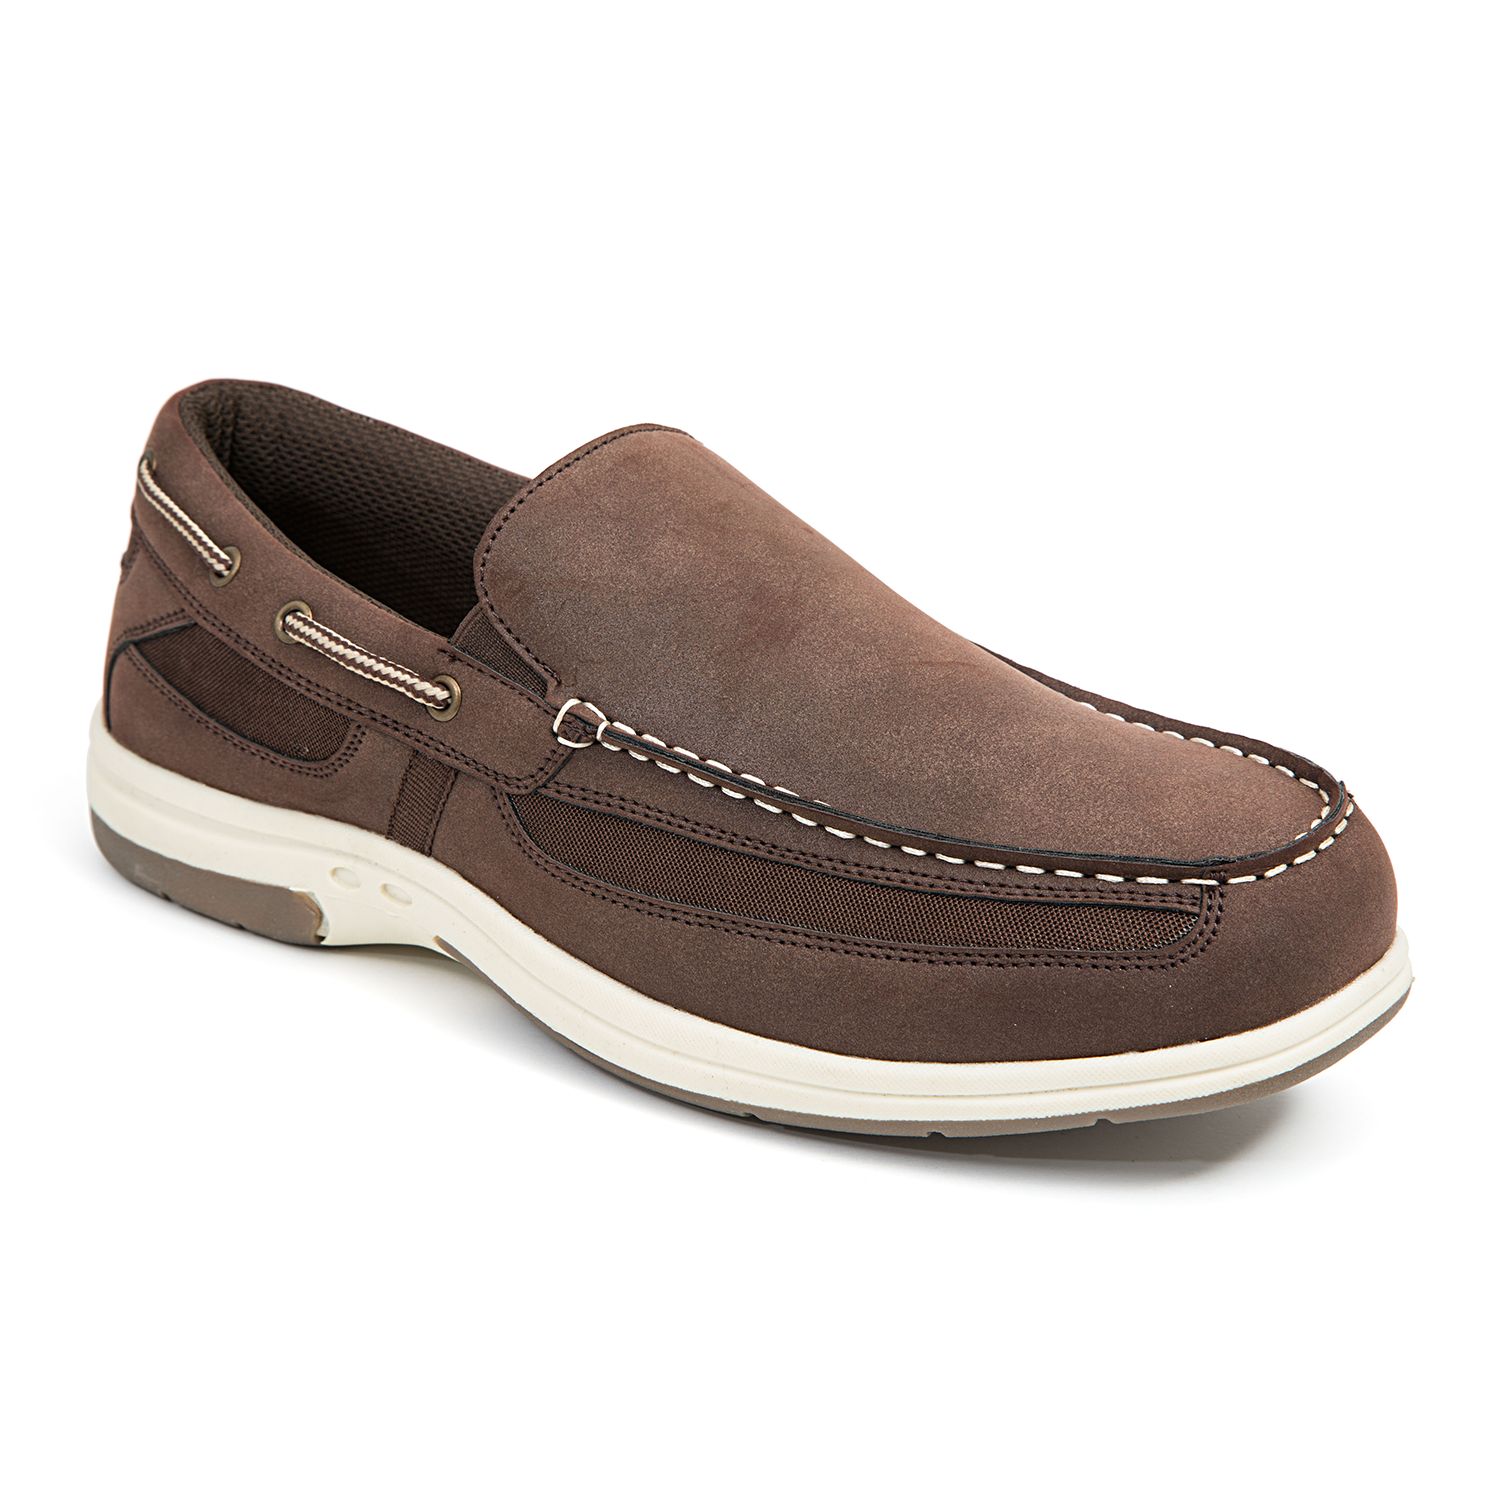 deer stags loafers